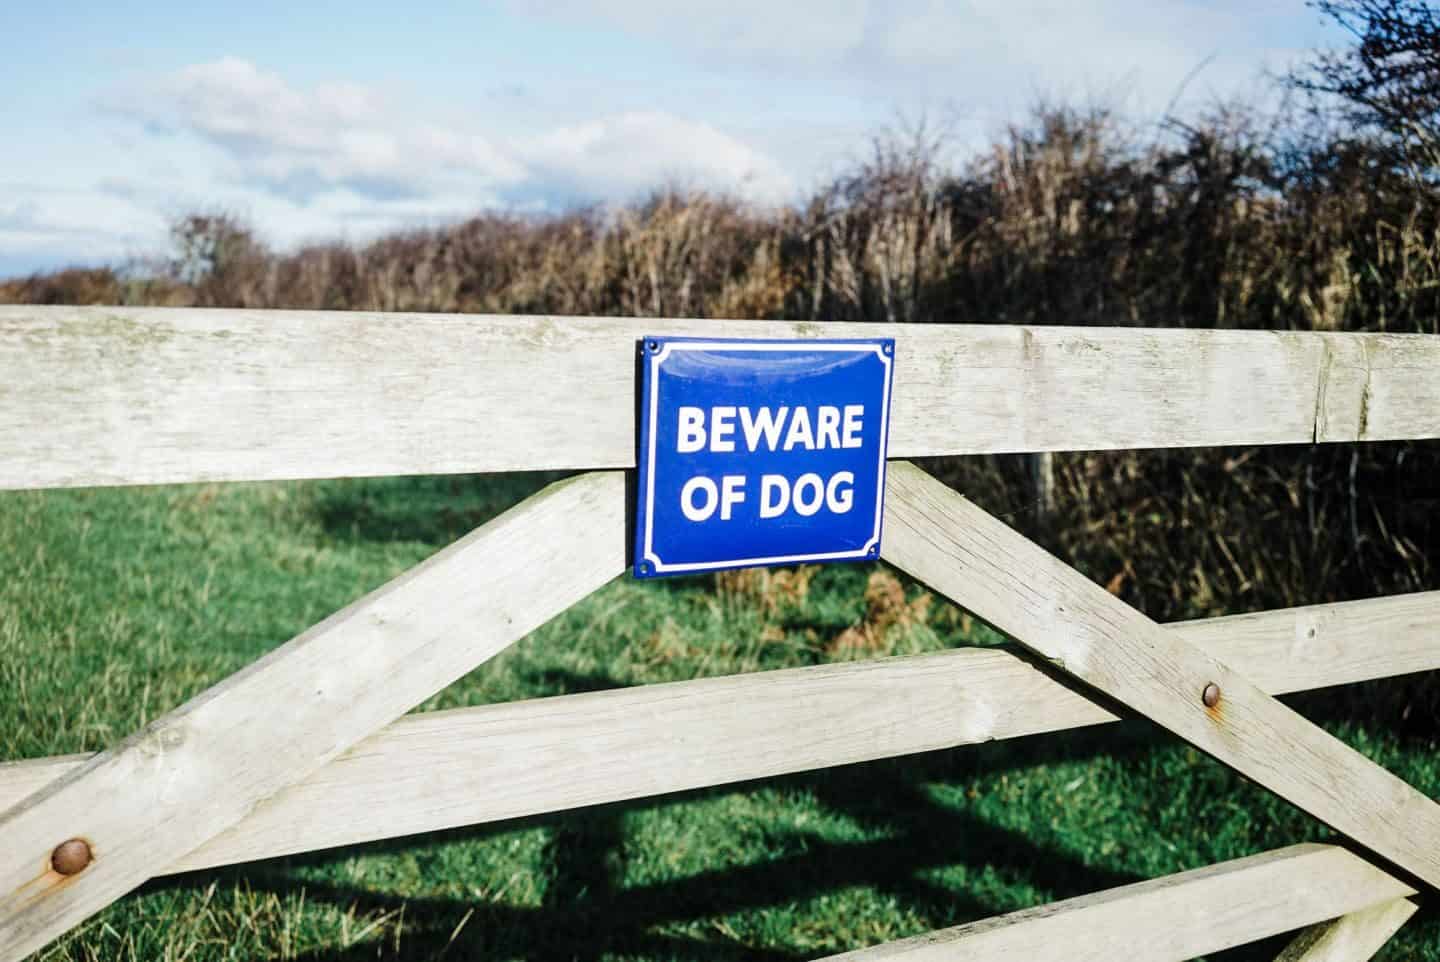 Beware of dog enamel signs from Ramsign seen on a gate in a field 